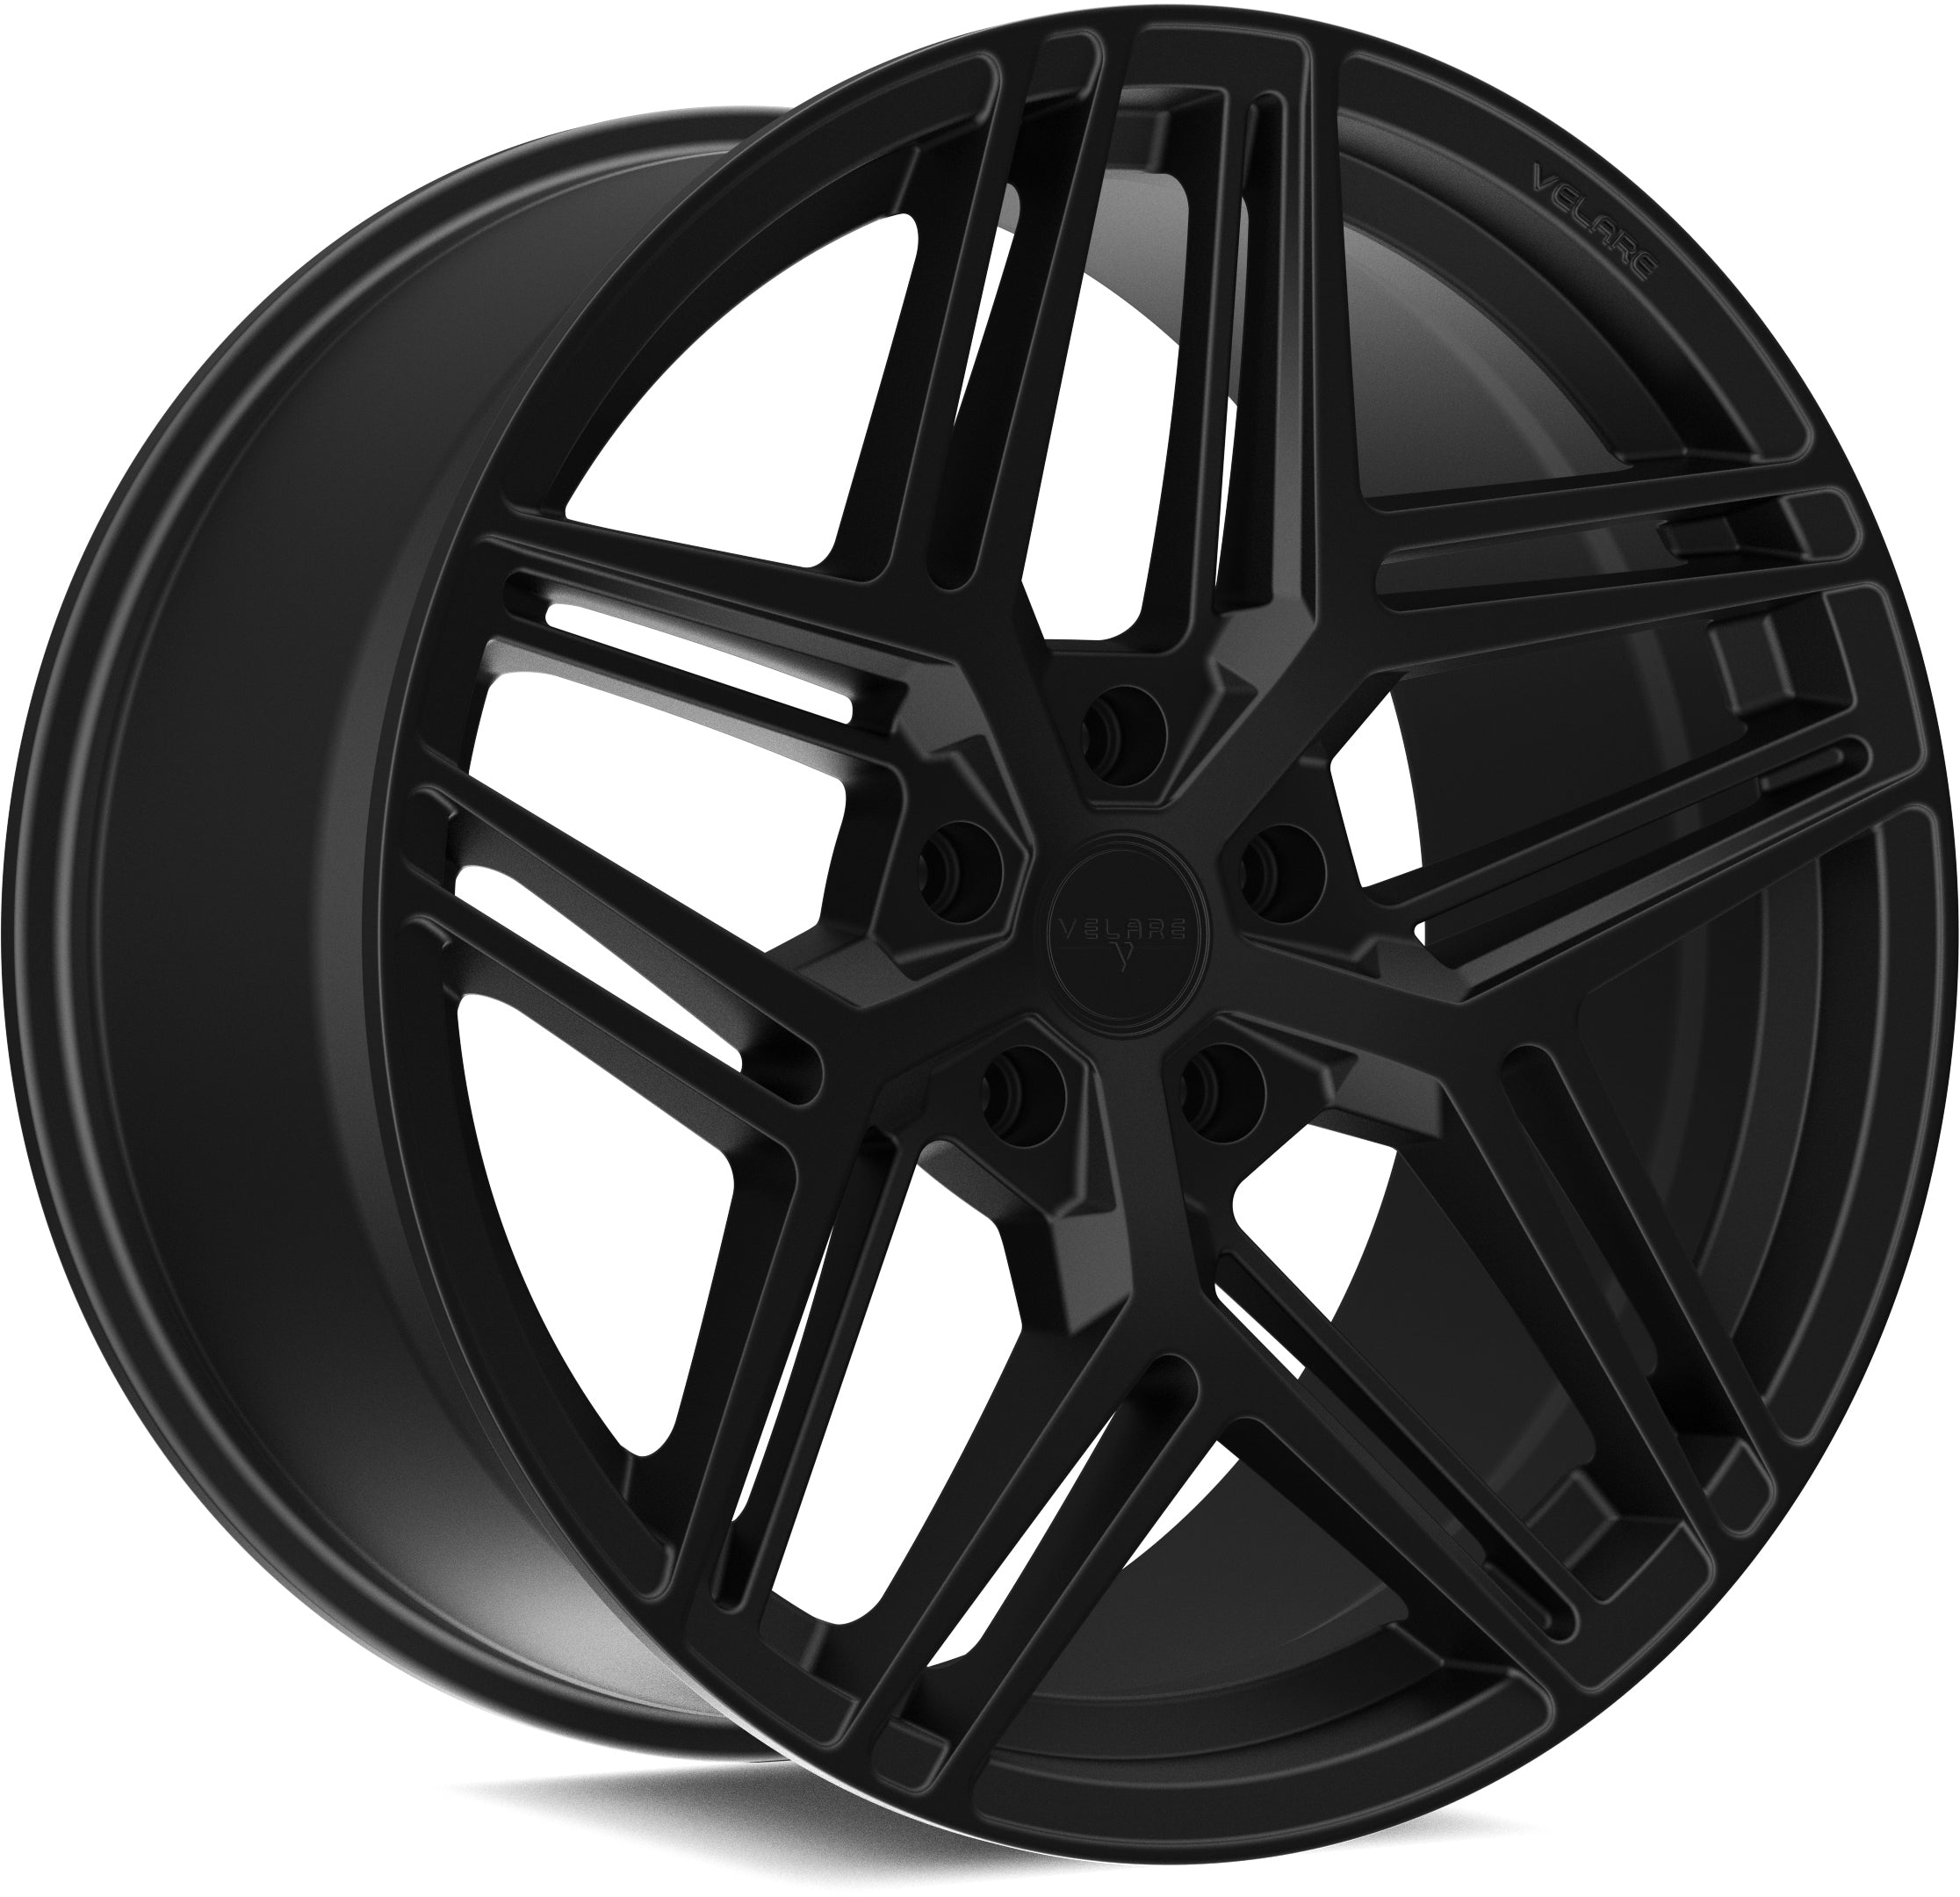 VLR16 Wheel and Tyre Package-Alloy wheels-Velare- DC Leisure